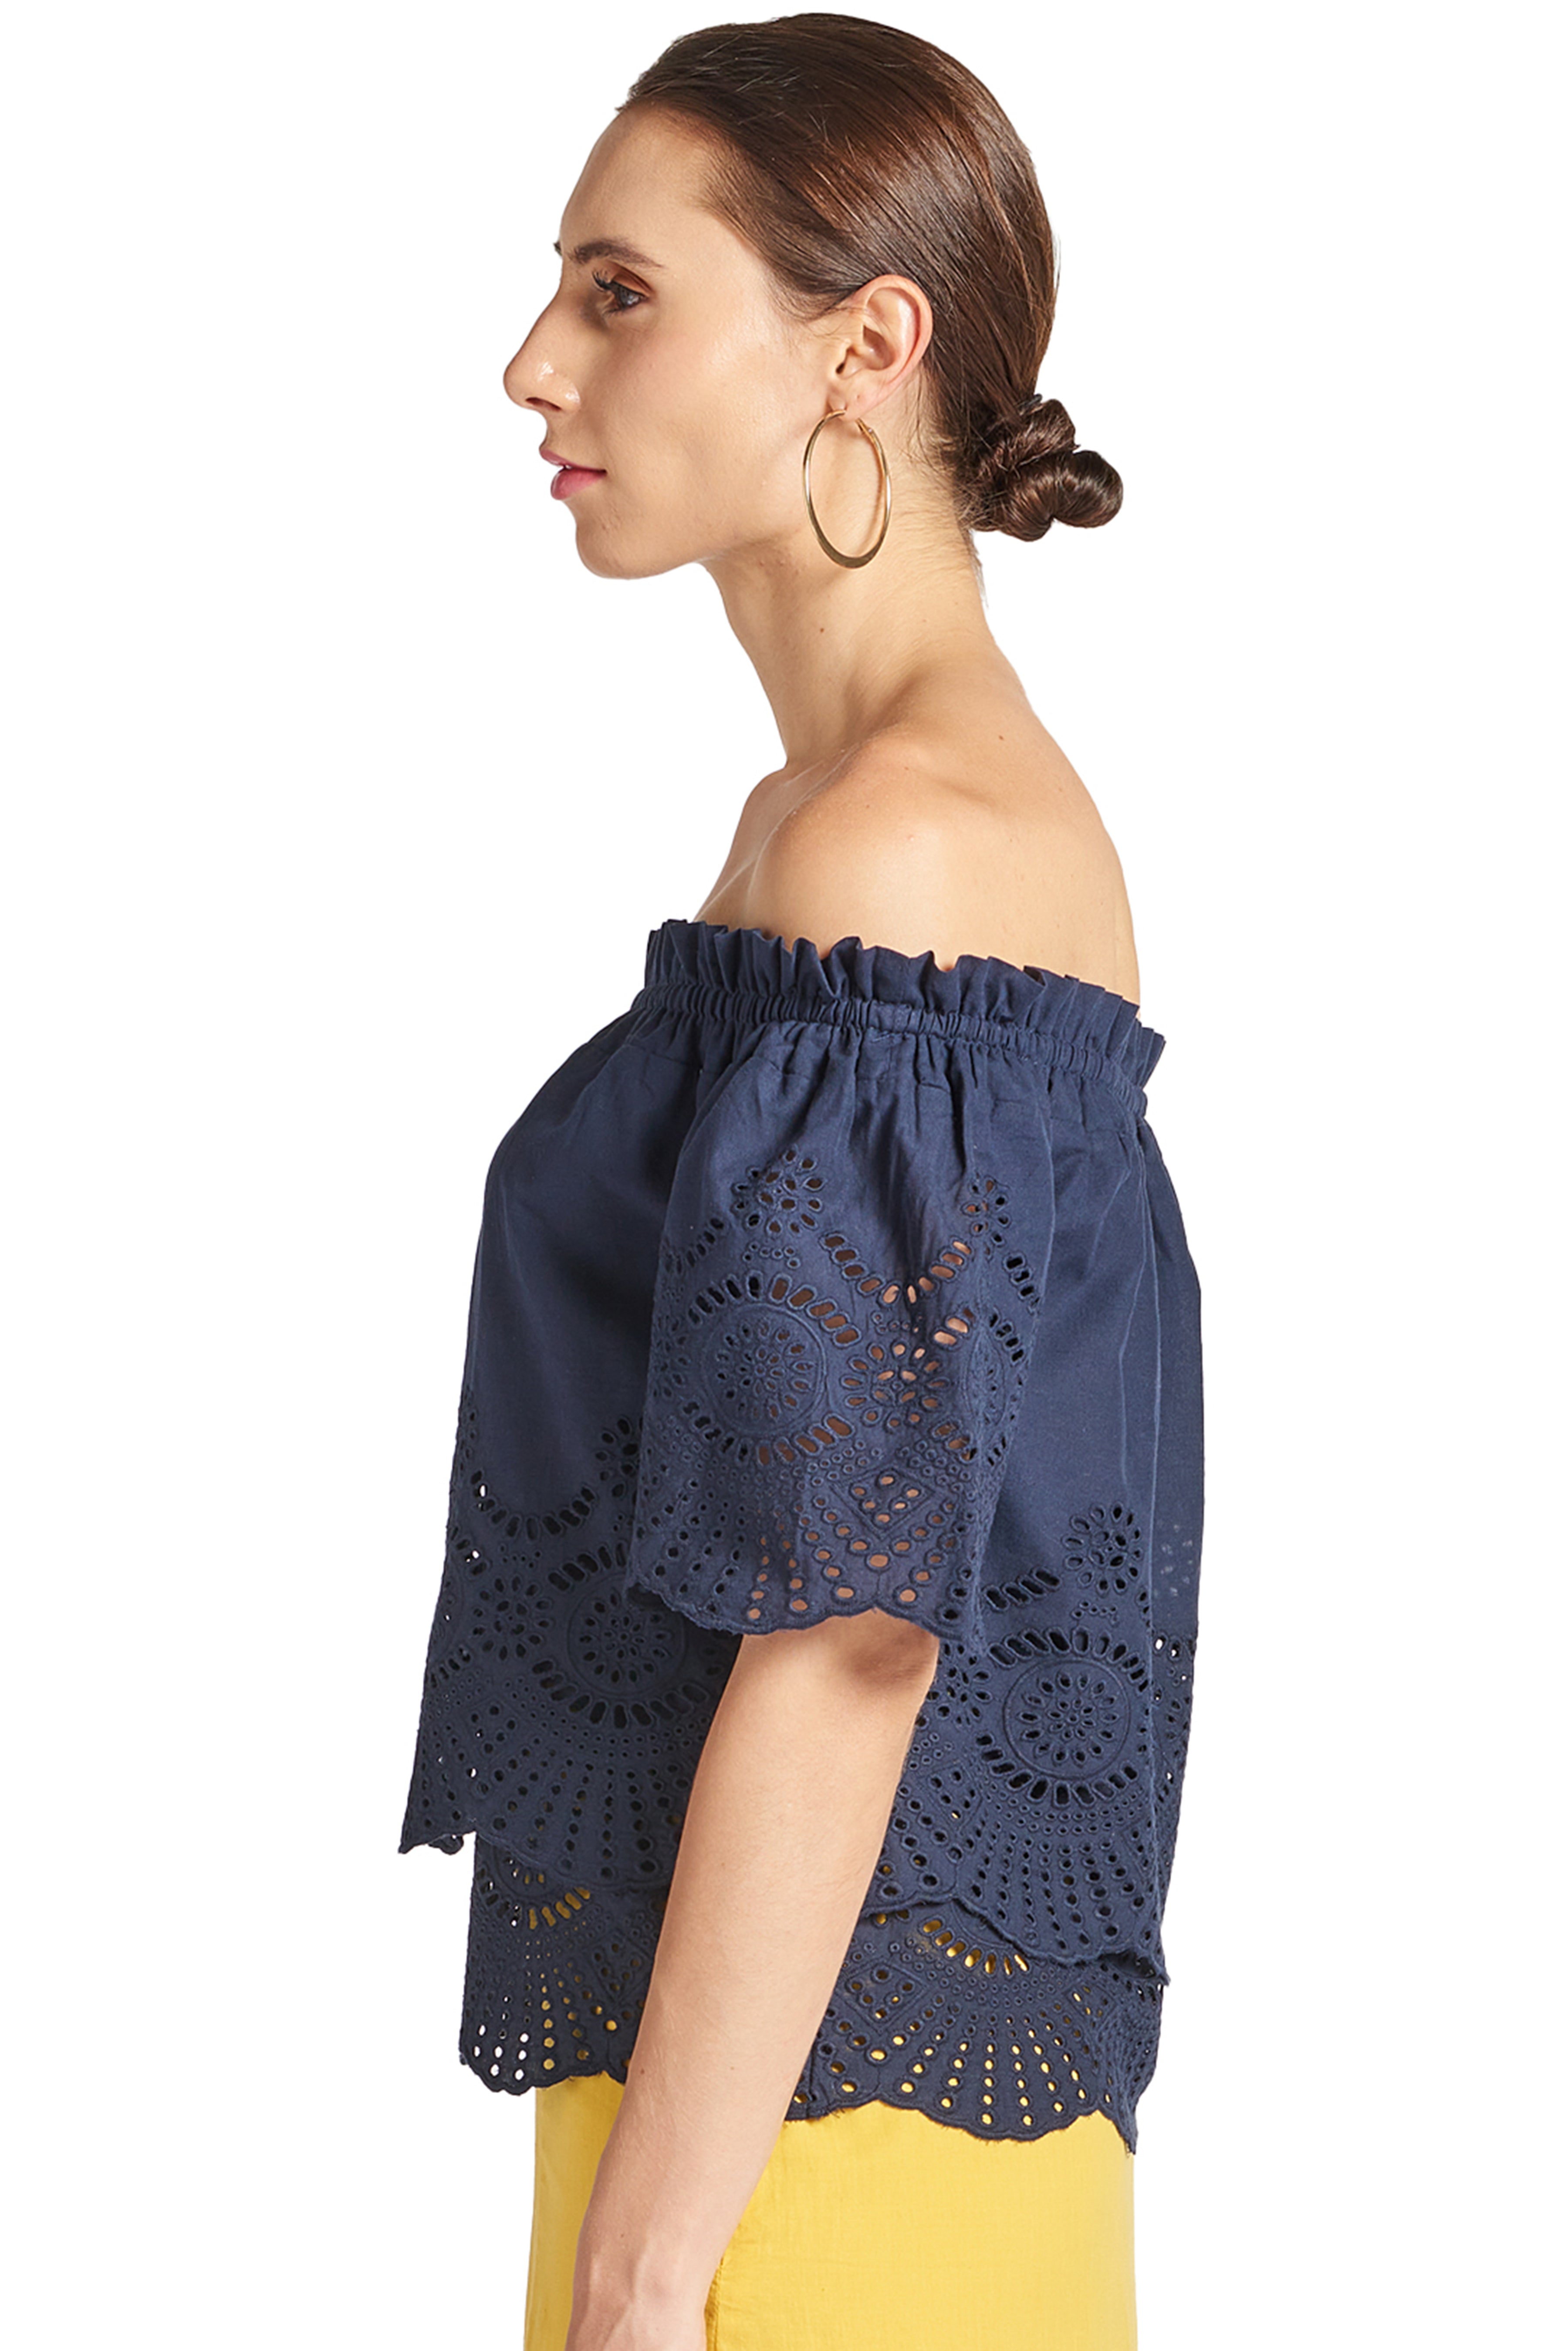 Side view of model wearing navy off the shoulder cotton eyelet top with scalloped short sleeves and scalloped bottom hem.